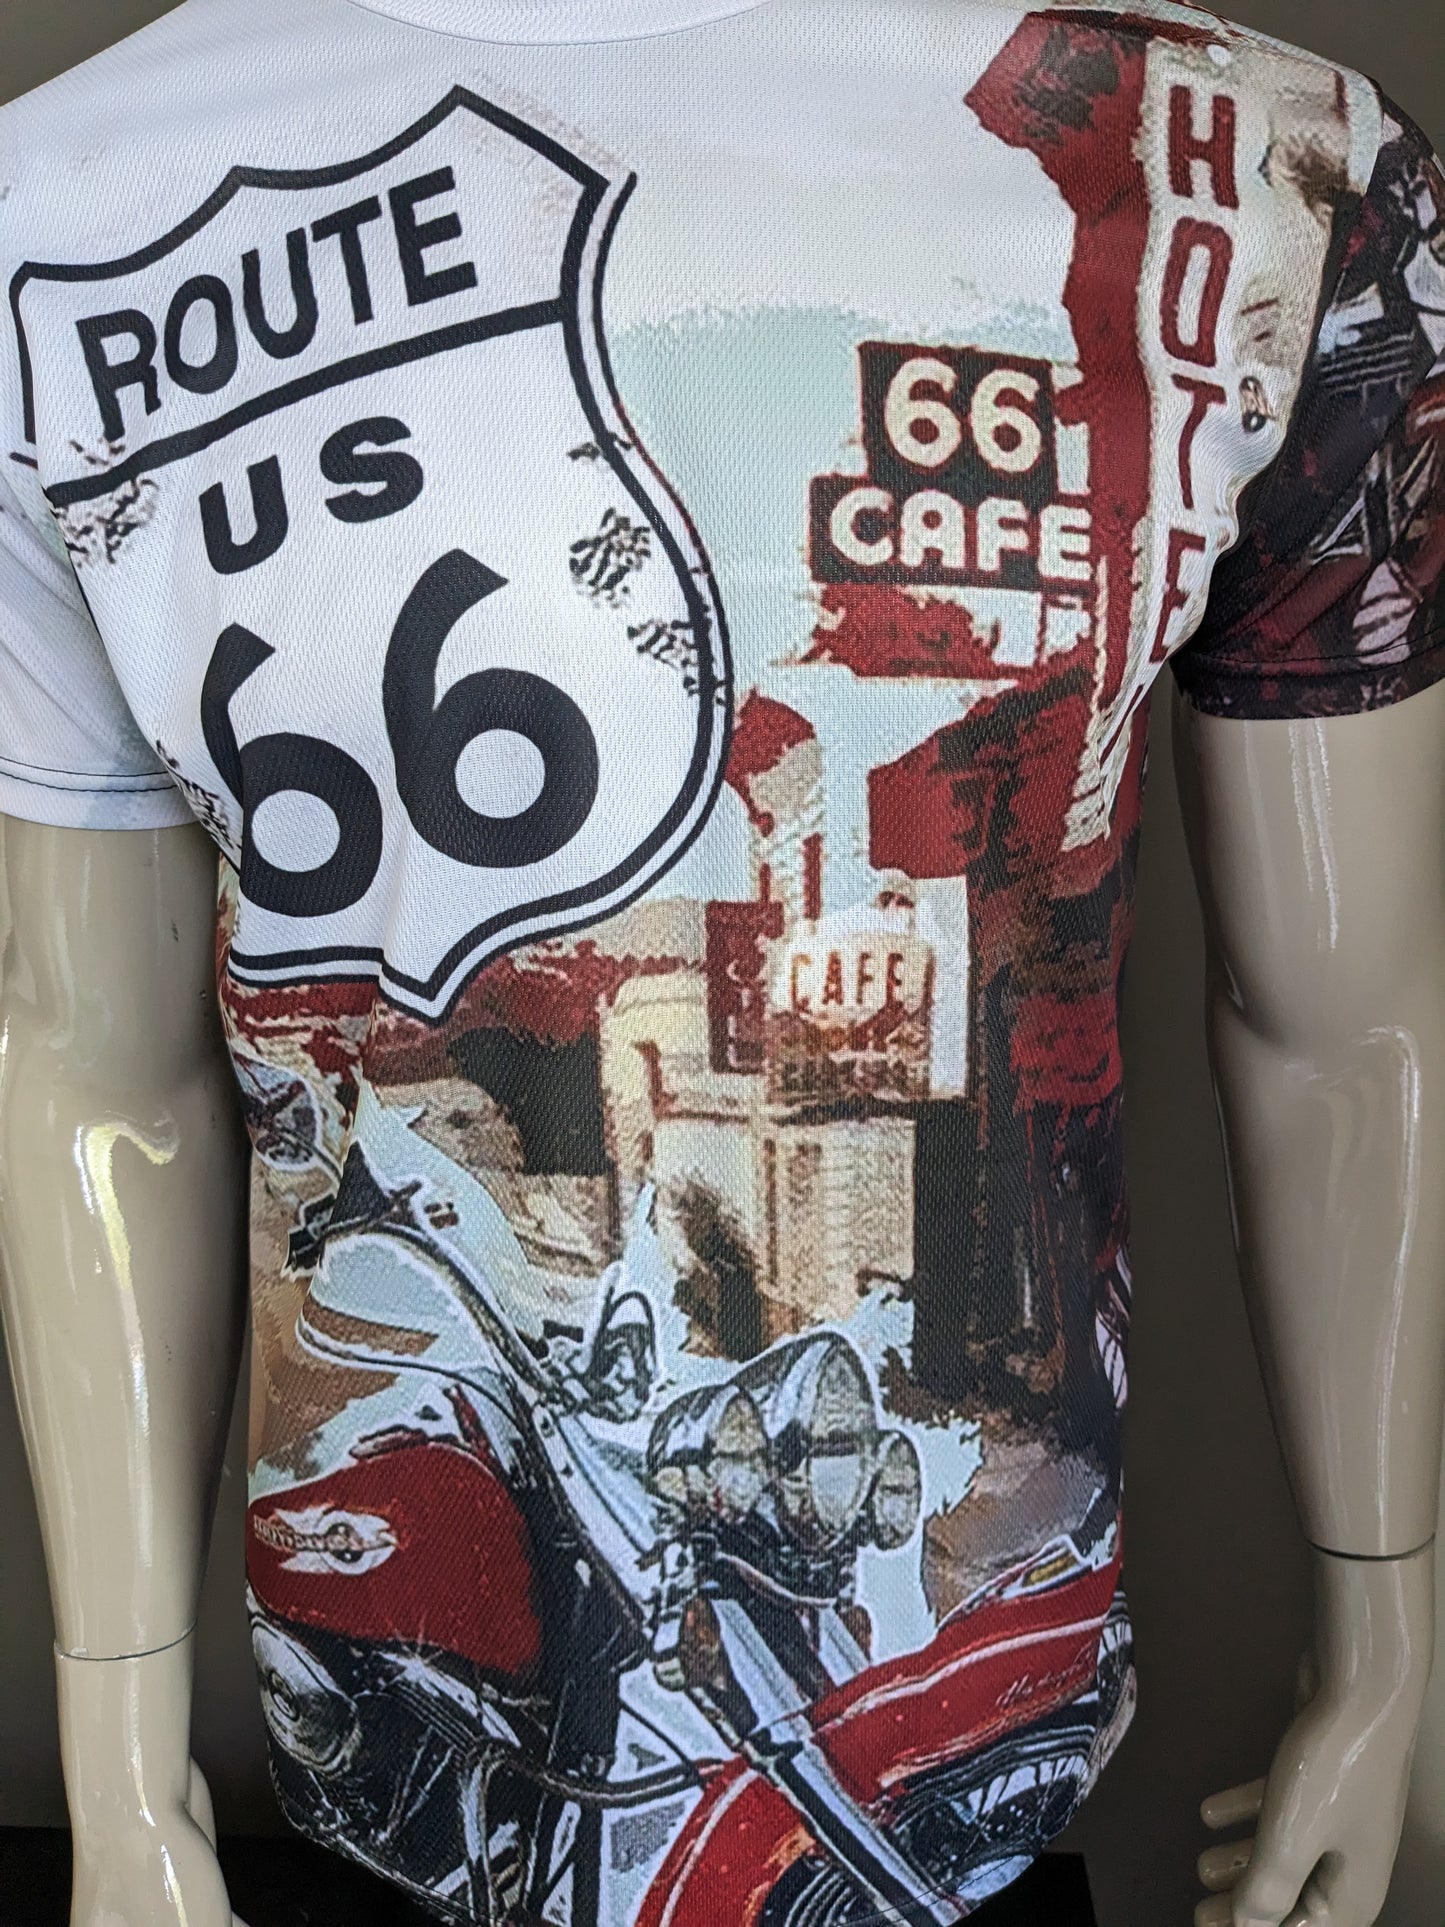 Route 66 shirt. White red black colored. Size M.